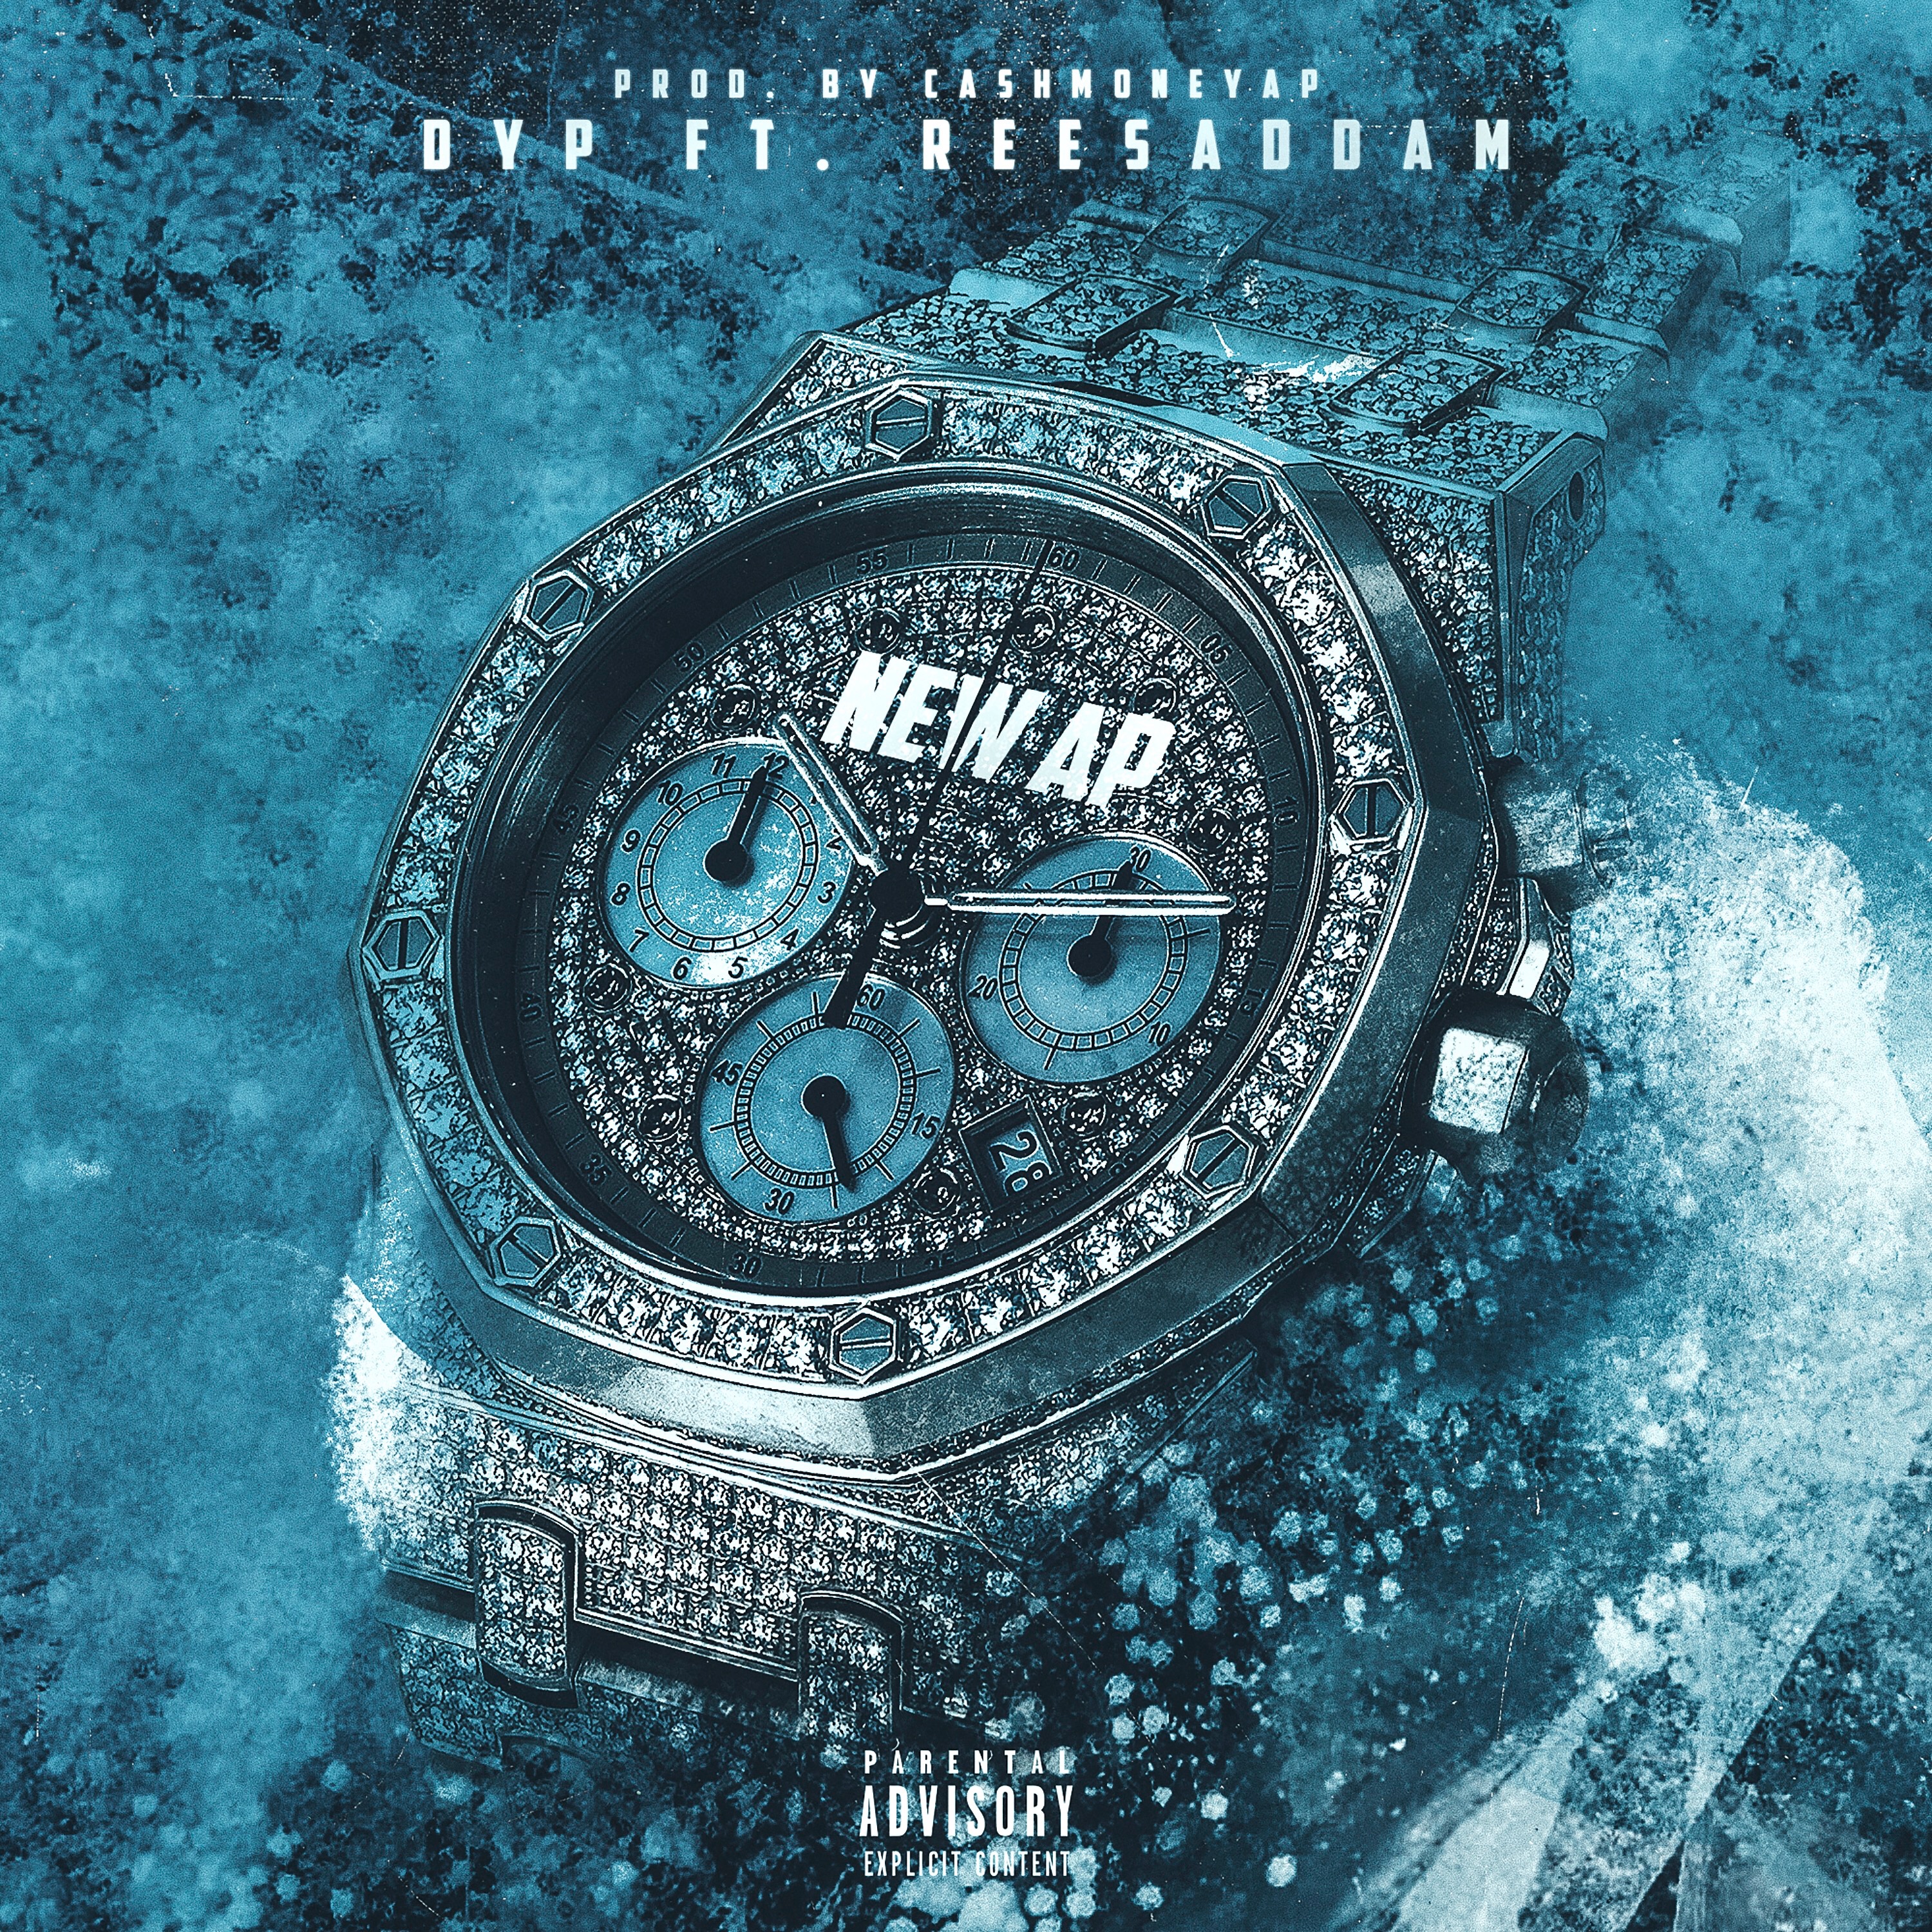 New Music! DYP ft. ReeSaddam “New AP” @OfficialDYP